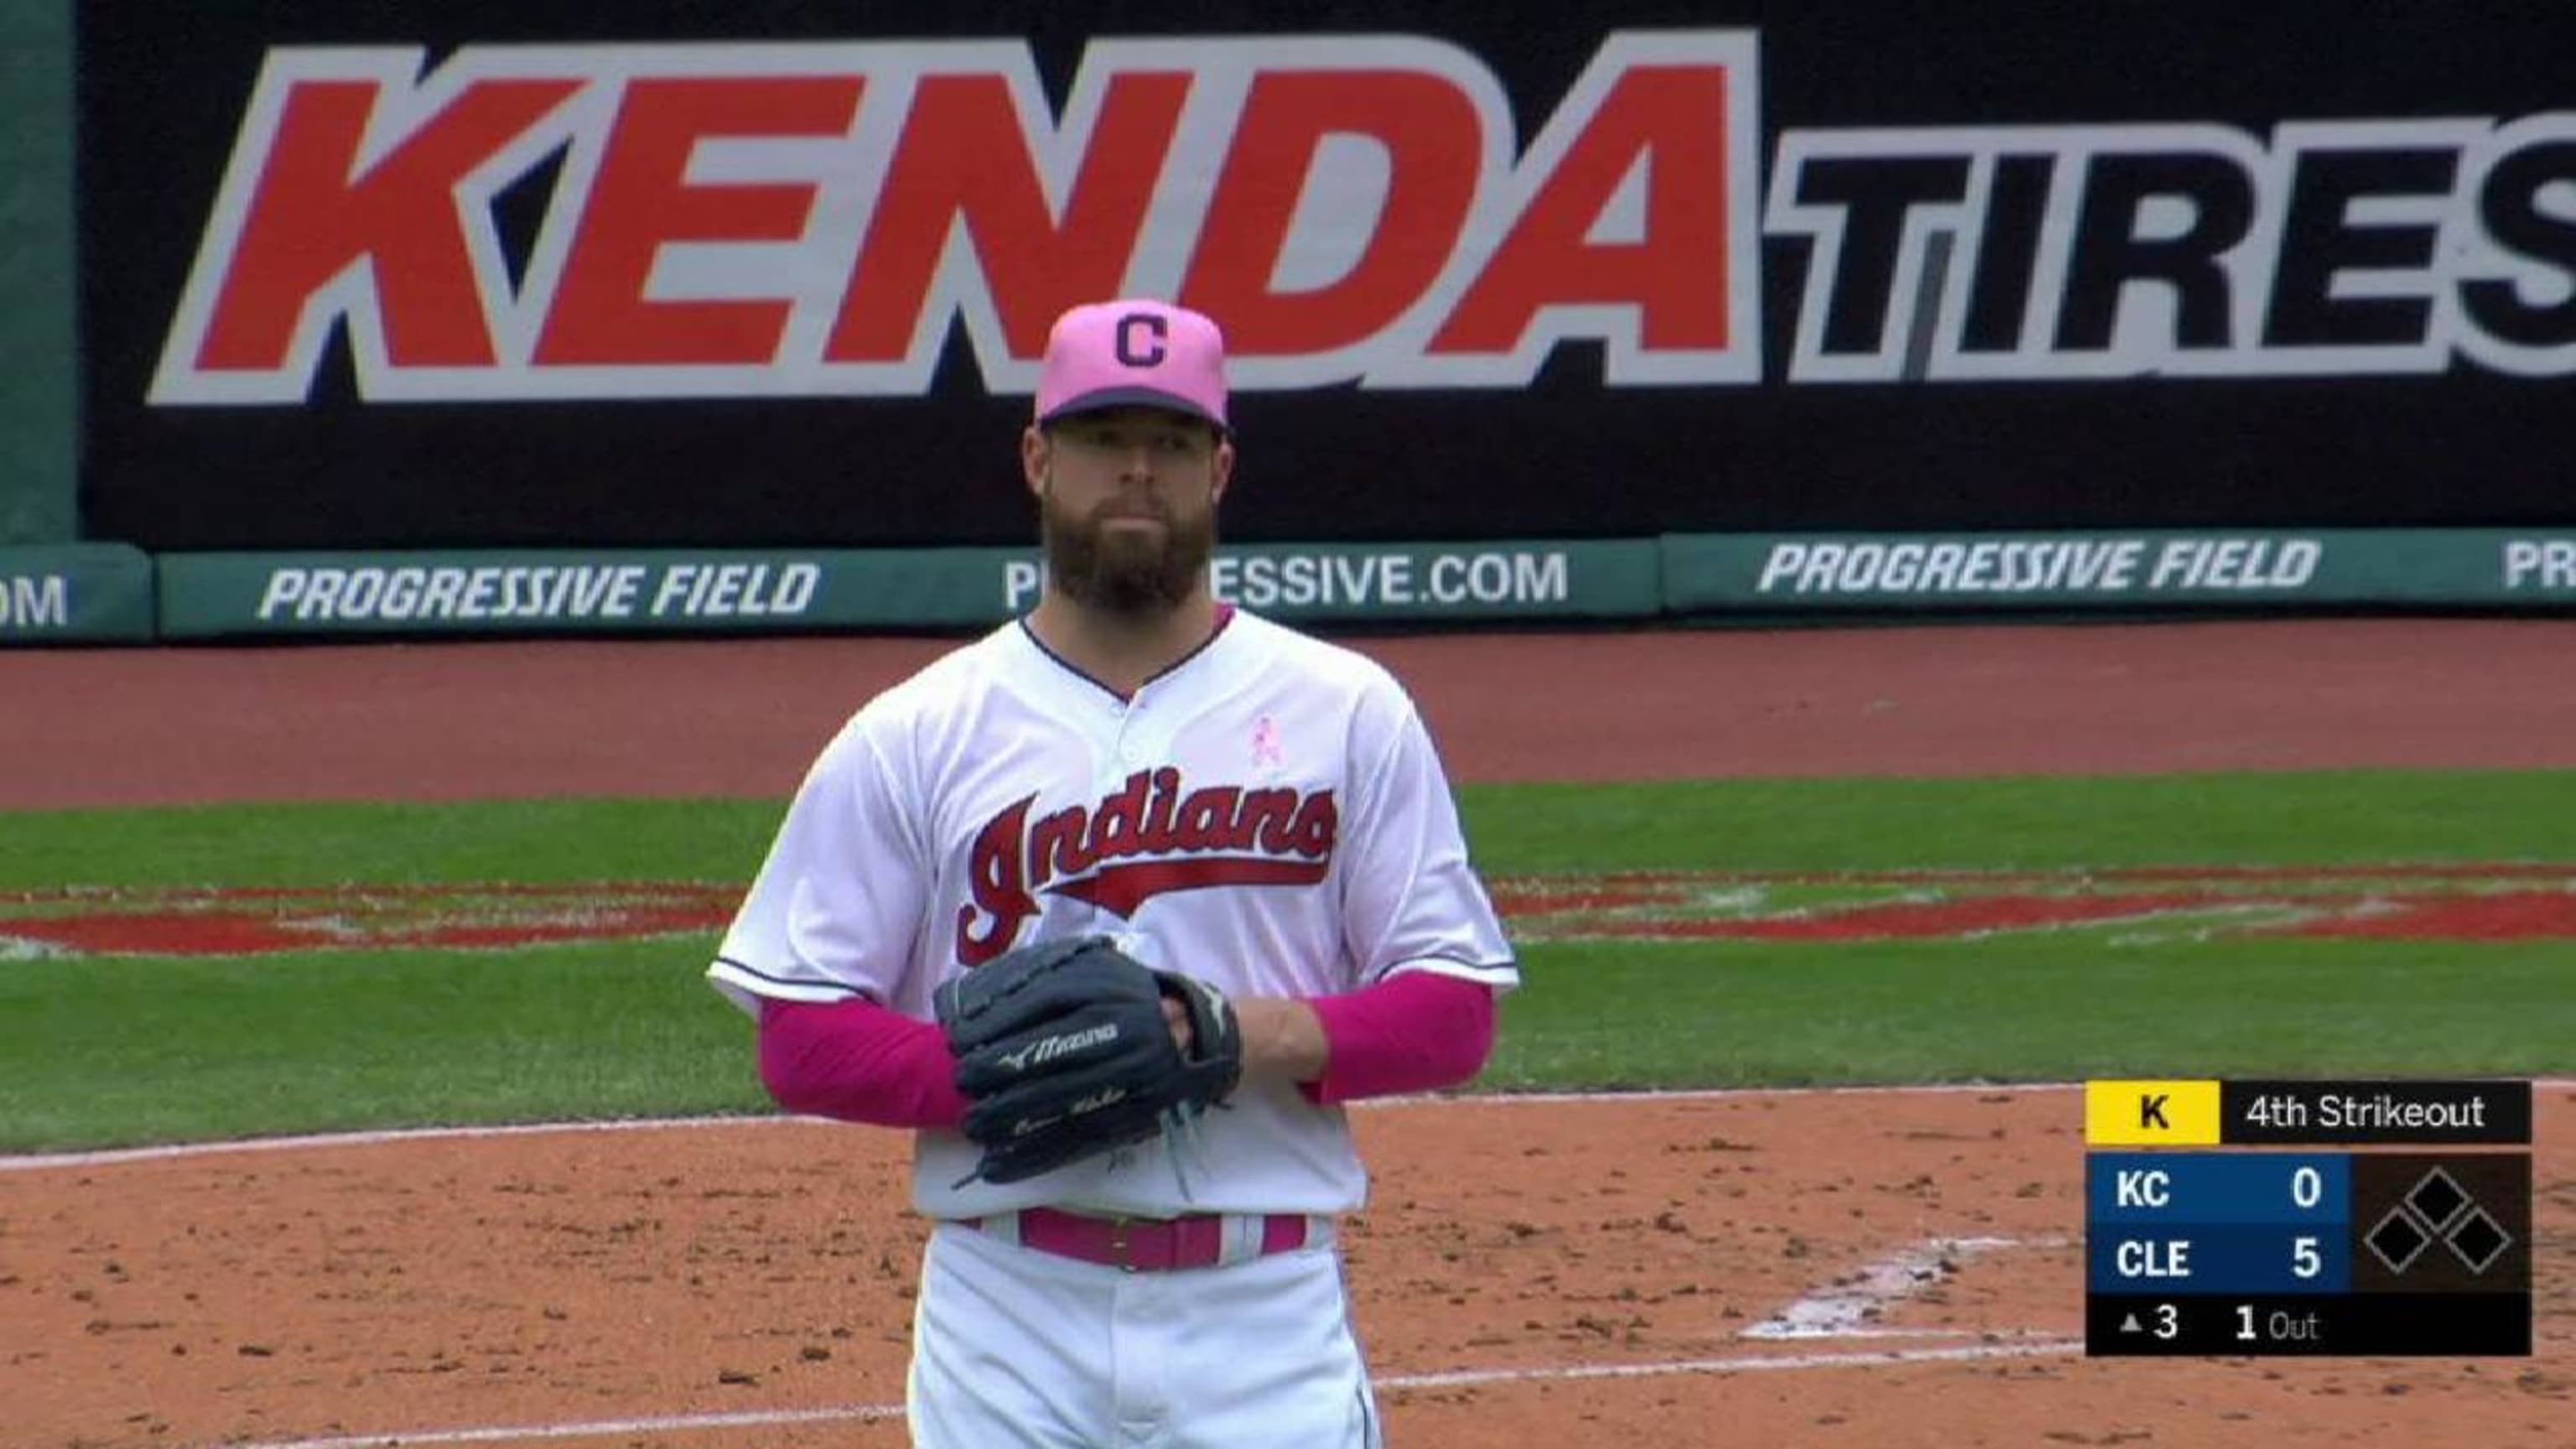 Corey Kluber doesn't even blink as he's pelted by teammates during dugout  interview